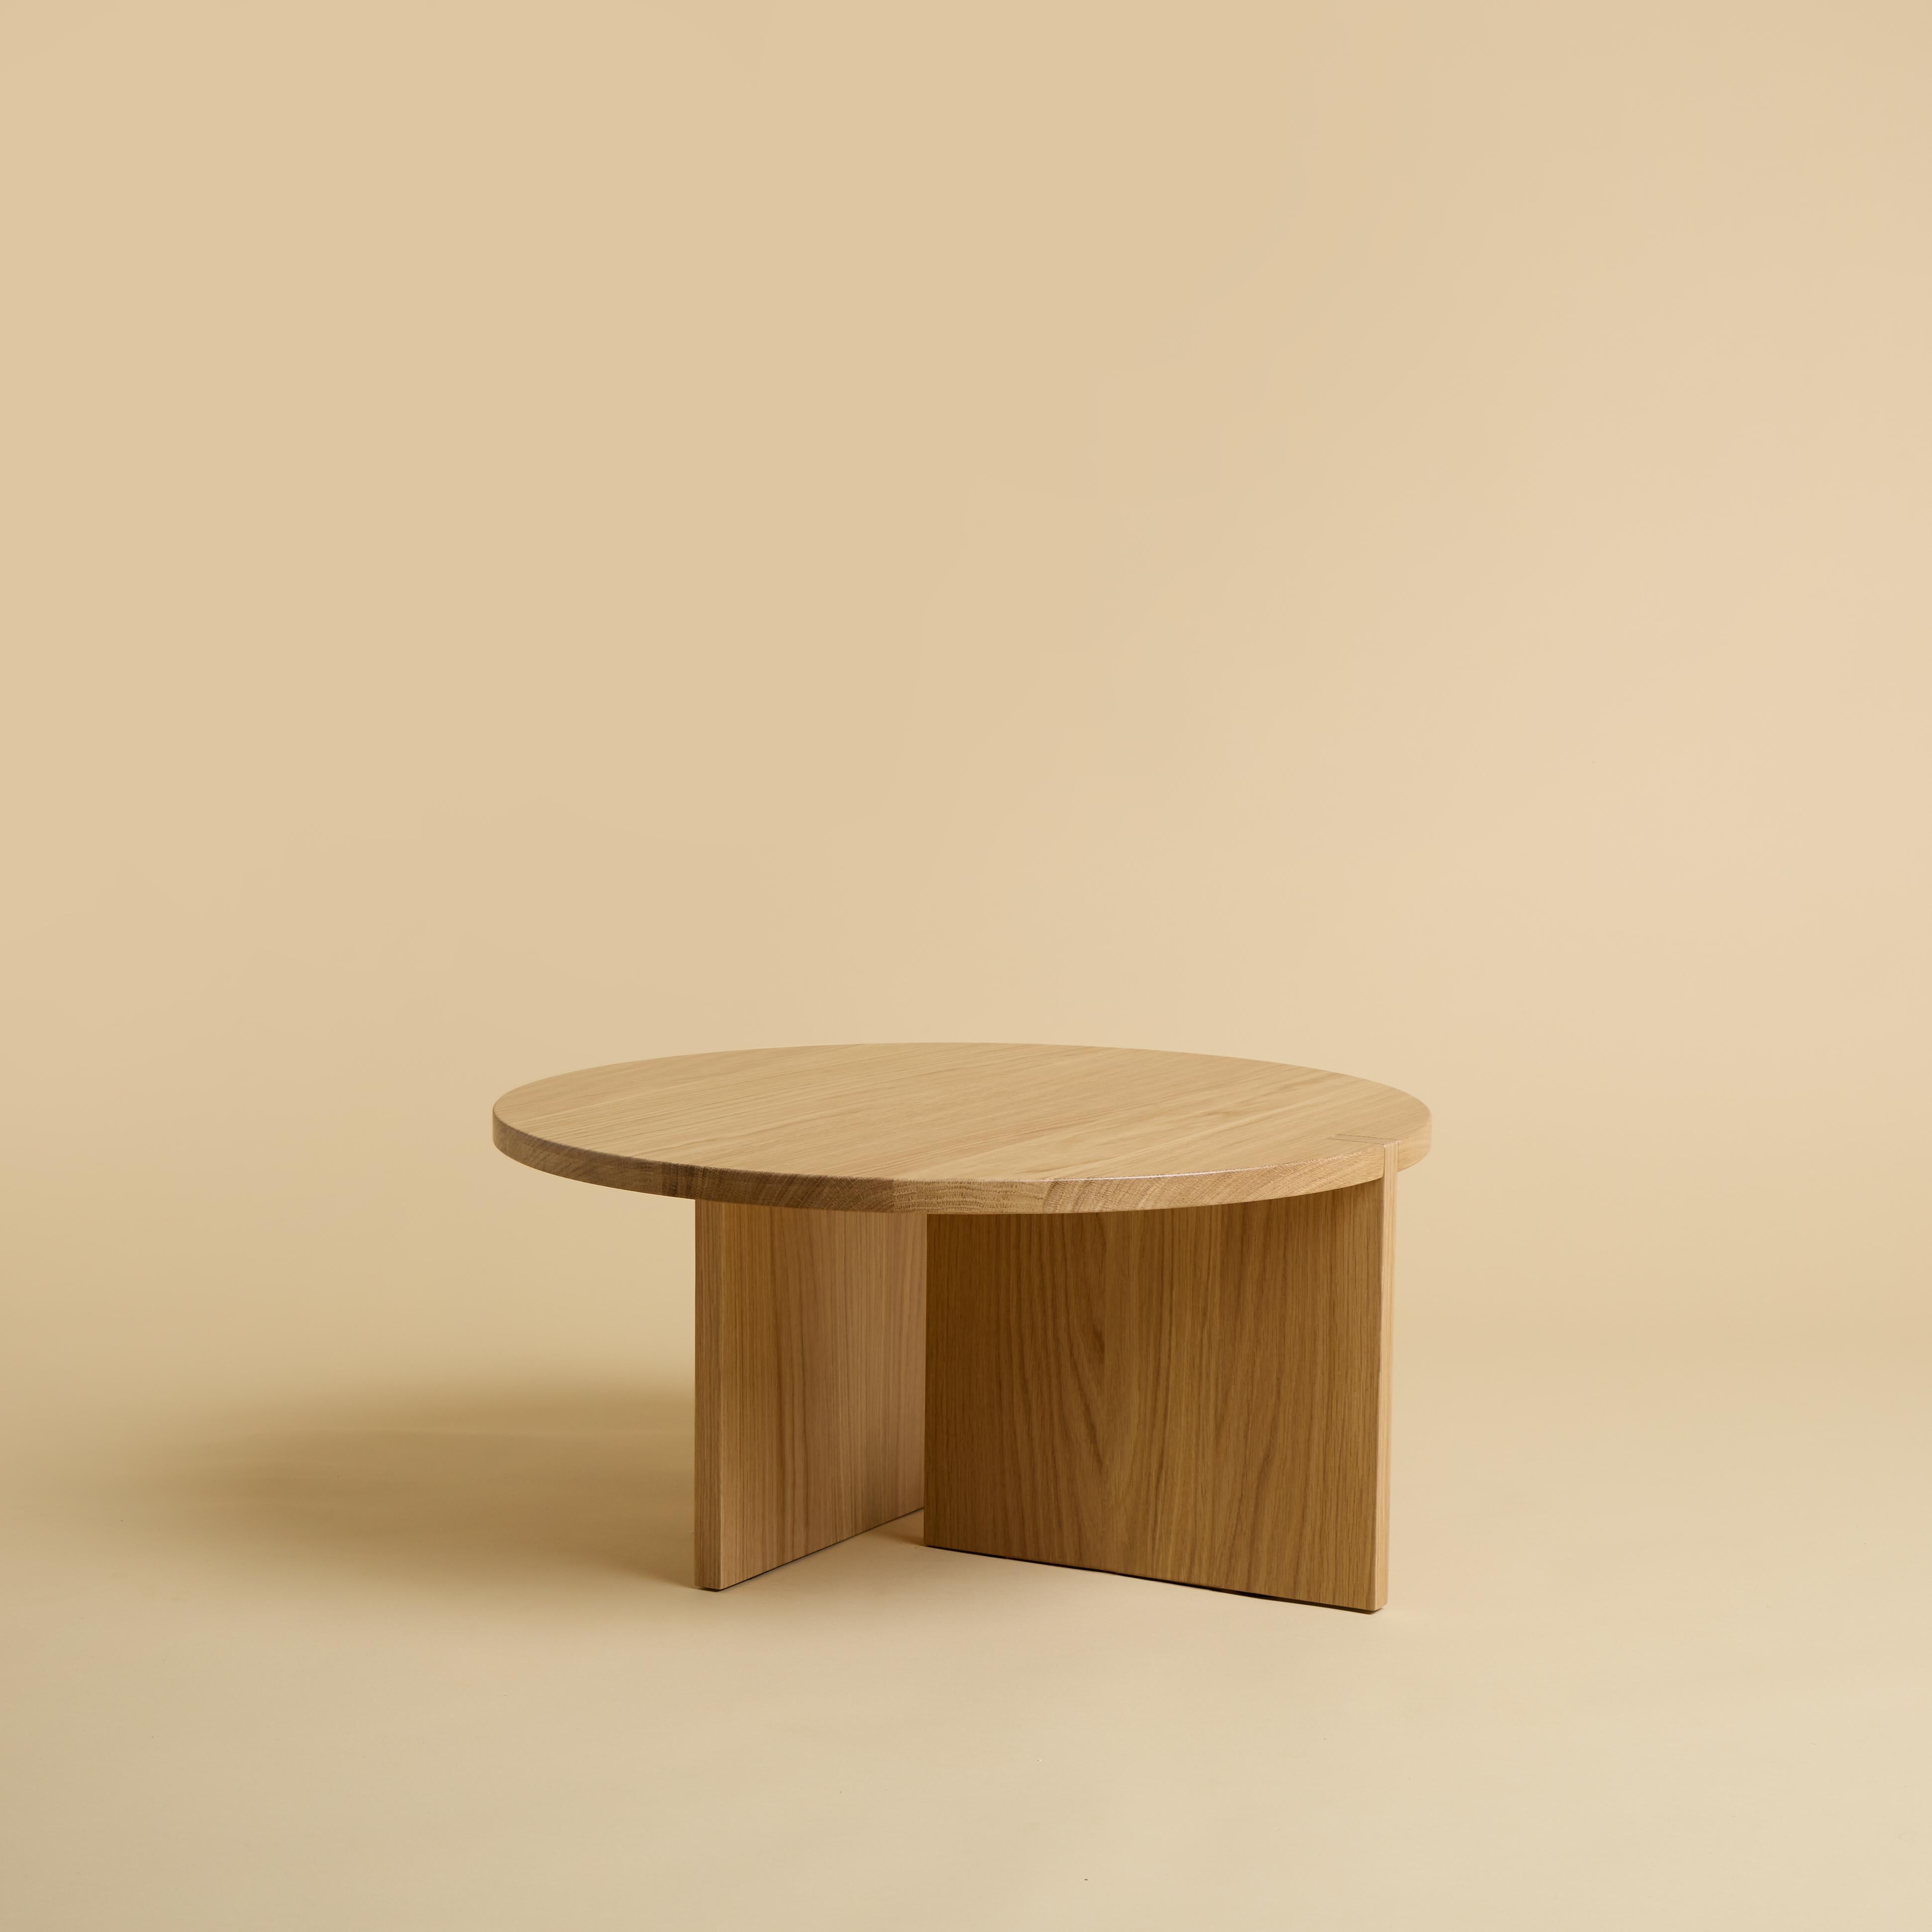 The coffee table Minami is made entirely of solid oak wood. The top is circular and has a diameter of 60cm, the legs are made from two glued solid wood boards in which one part is inlaid on the top.
The piece is designed by Lebanto and is 100% Made